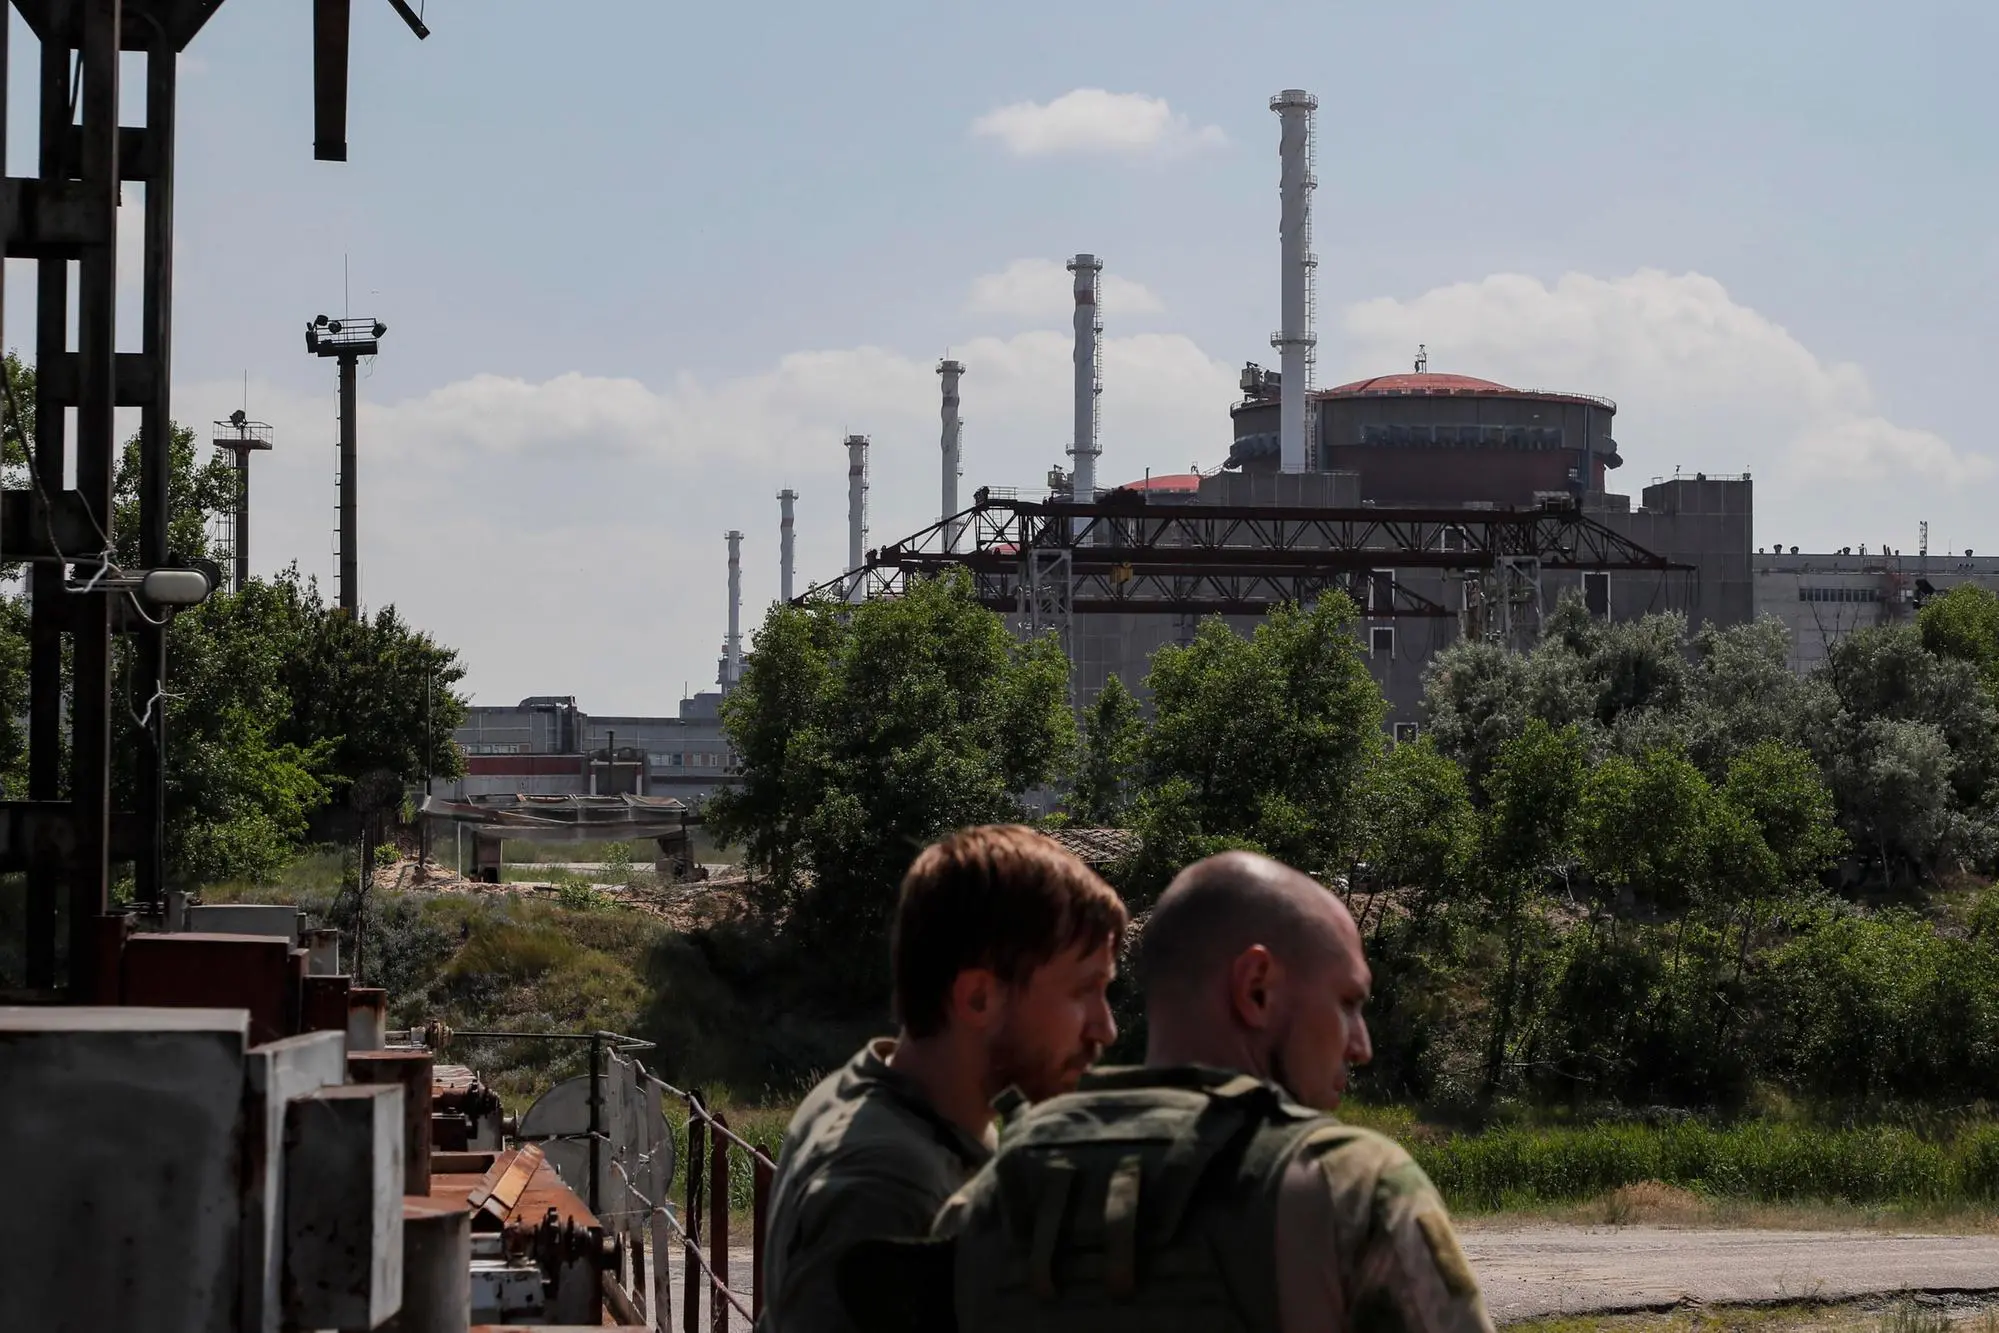 epa10693169 A picture taken during a visit to Enerhodar organised by the Russian Defence ministry shows a general view of the Zaporizhzhia Nuclear Power Plant in Enerhodar, southeastern Ukraine, 15 June 2023. The Zaporizhzhia Nuclear Power Plant can still continue to draw water from the Kakhovka reservoir, the IAEA reports. Grossi said that after the destruction of the Kakhovka hydroelectric power station, a situation may arise when the water from the Kakhovka reservoir will not be enough to cool the reactors of the Zaporozhye nuclear power plant. According to him, in this case, the reactors can be damaged, which threatens with the onset of radiological consequences. The water level in the reservoir near the Zaporizhzhya TPP has dropped to 11.27 meters and continues to decline. EPA/SERGEI ILNITSKY